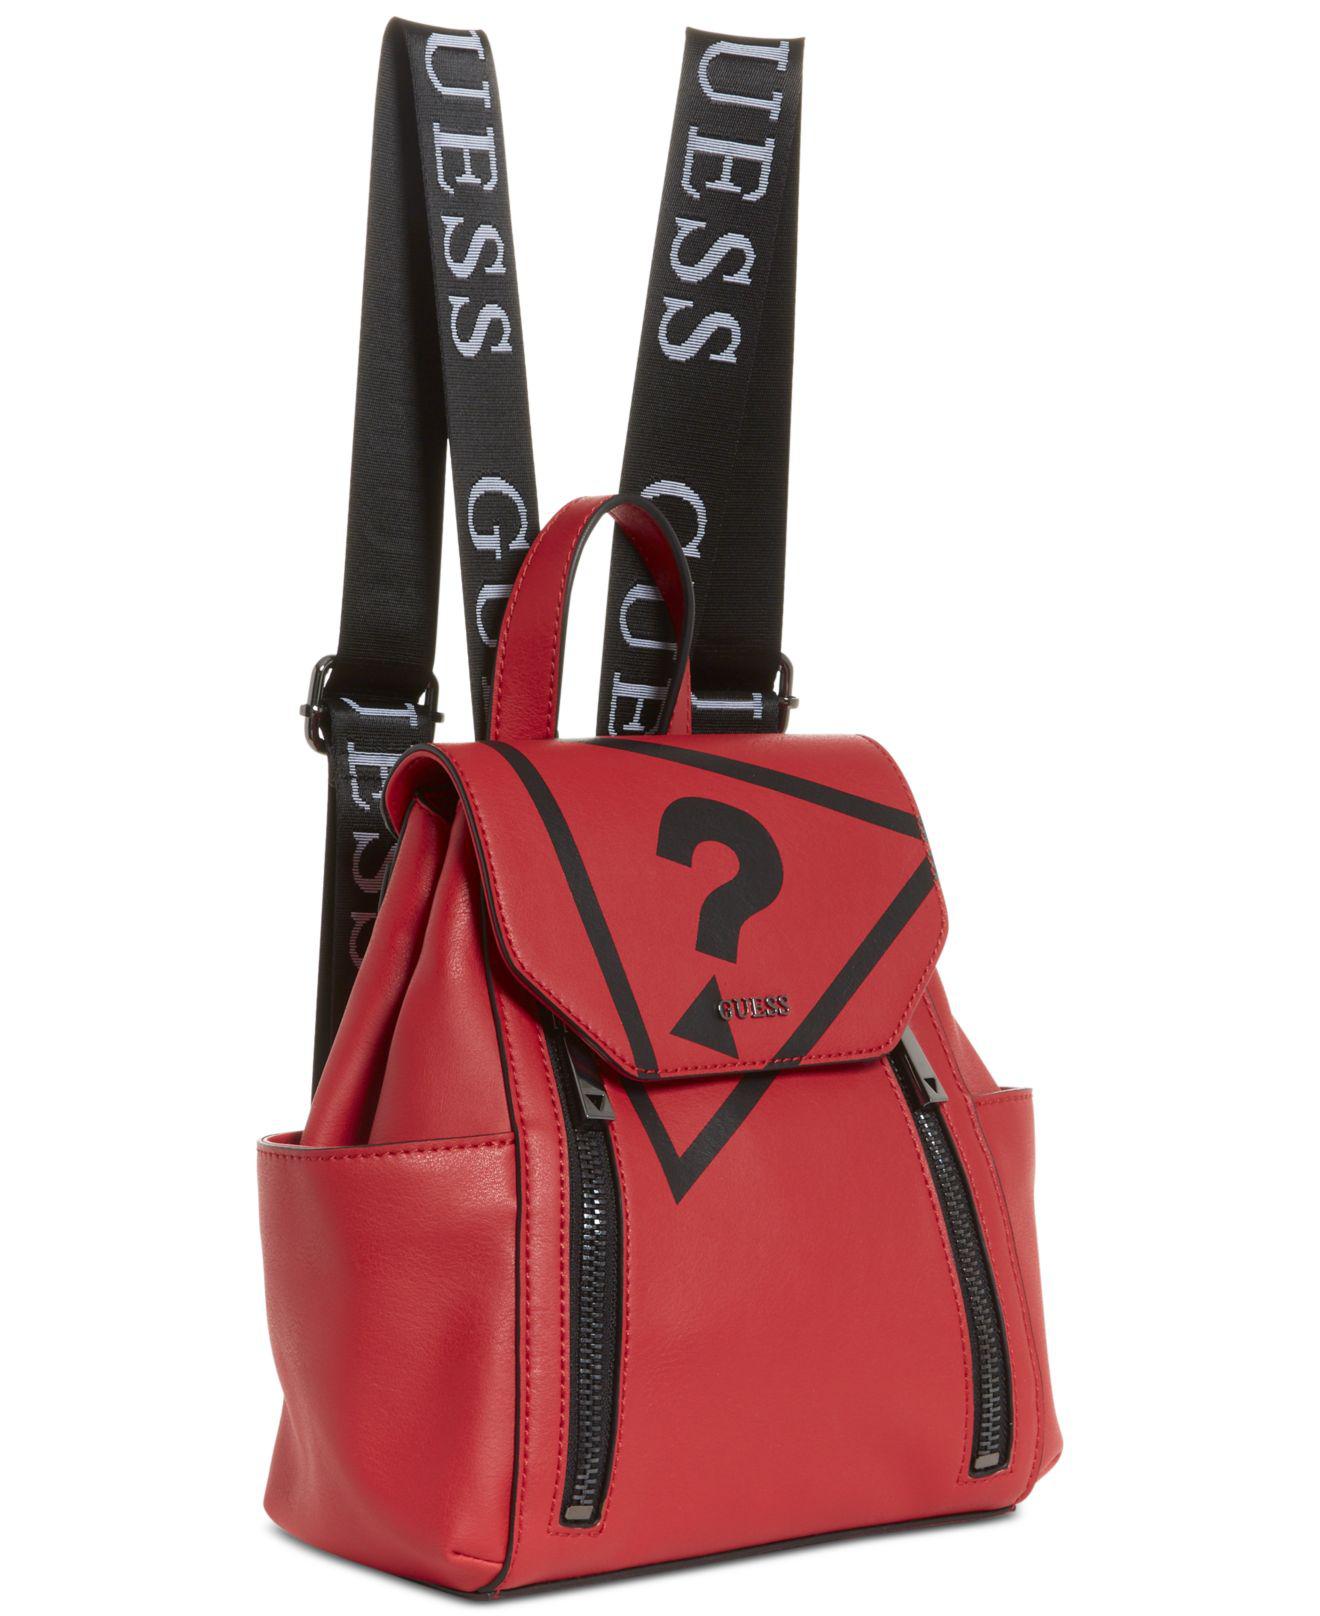 Guess Urban Sport Savoy Logo Small Backpack in Red/Silver (Red) - Lyst